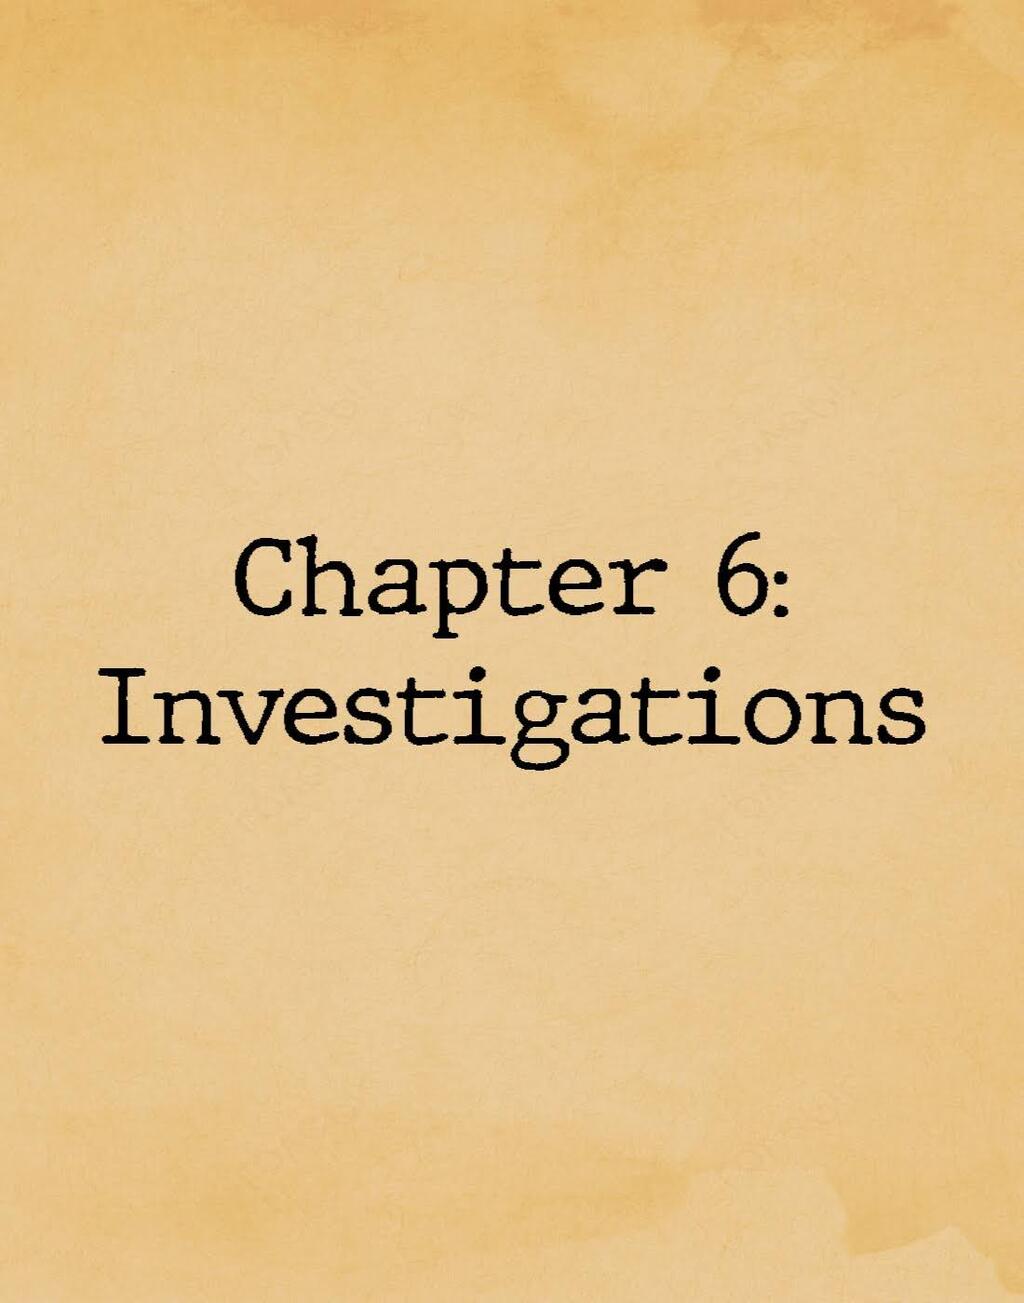 Chapter 6: Investigations